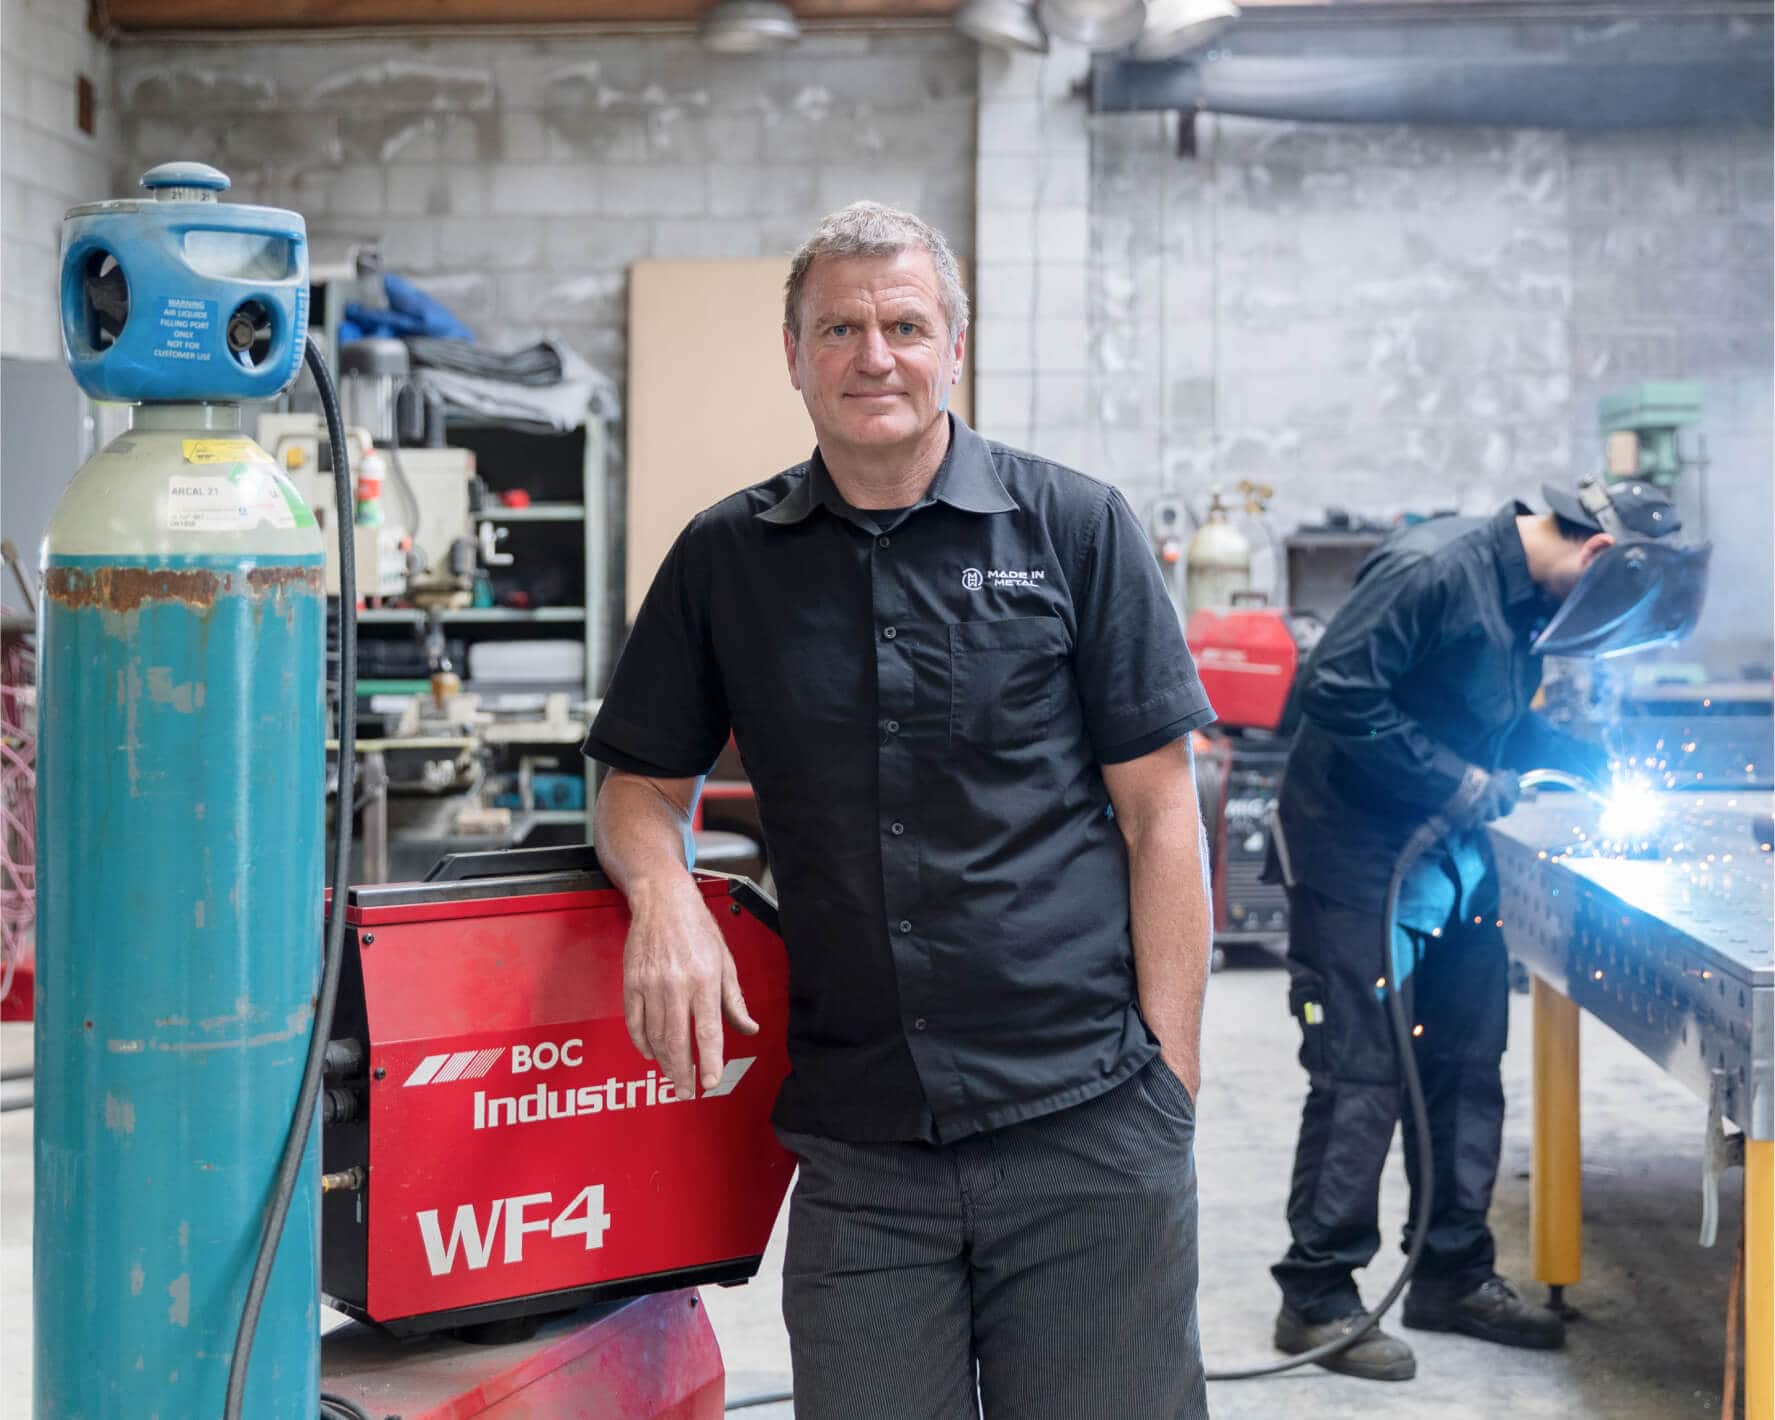 An industrial manufacturer and his team weld components and fabricate products while Xero takes care of the accounting.